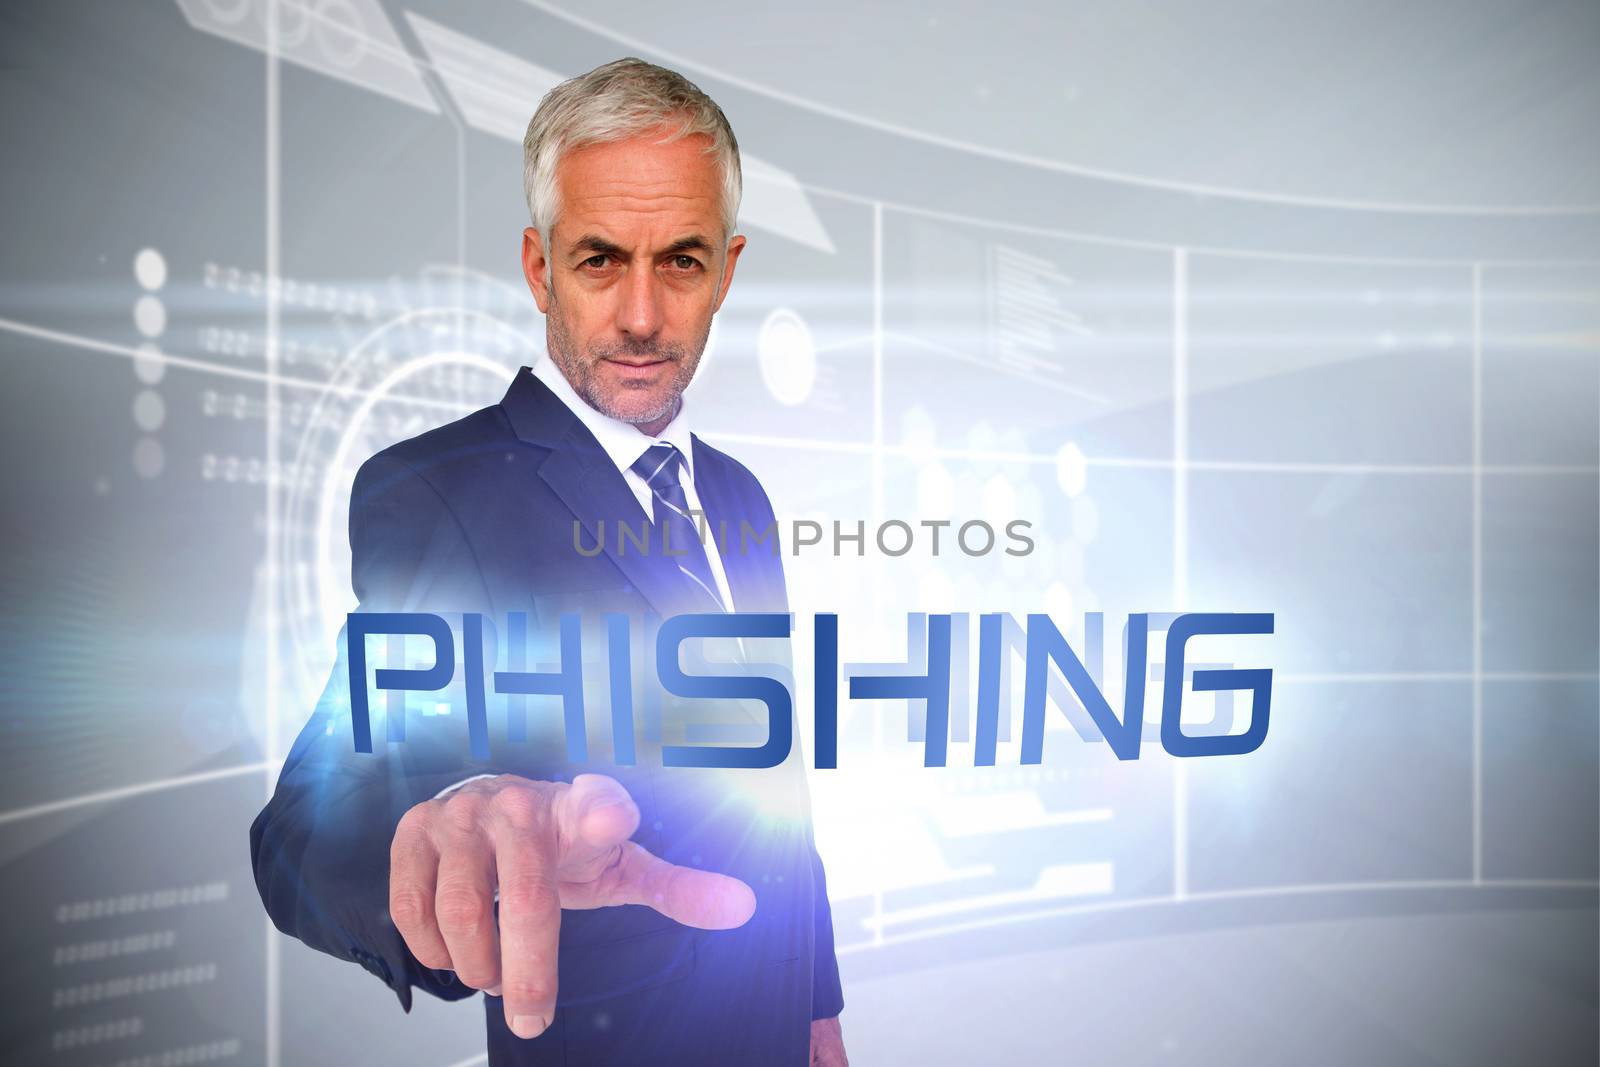 The word phishing and businessman pointing against futuristic technology interface